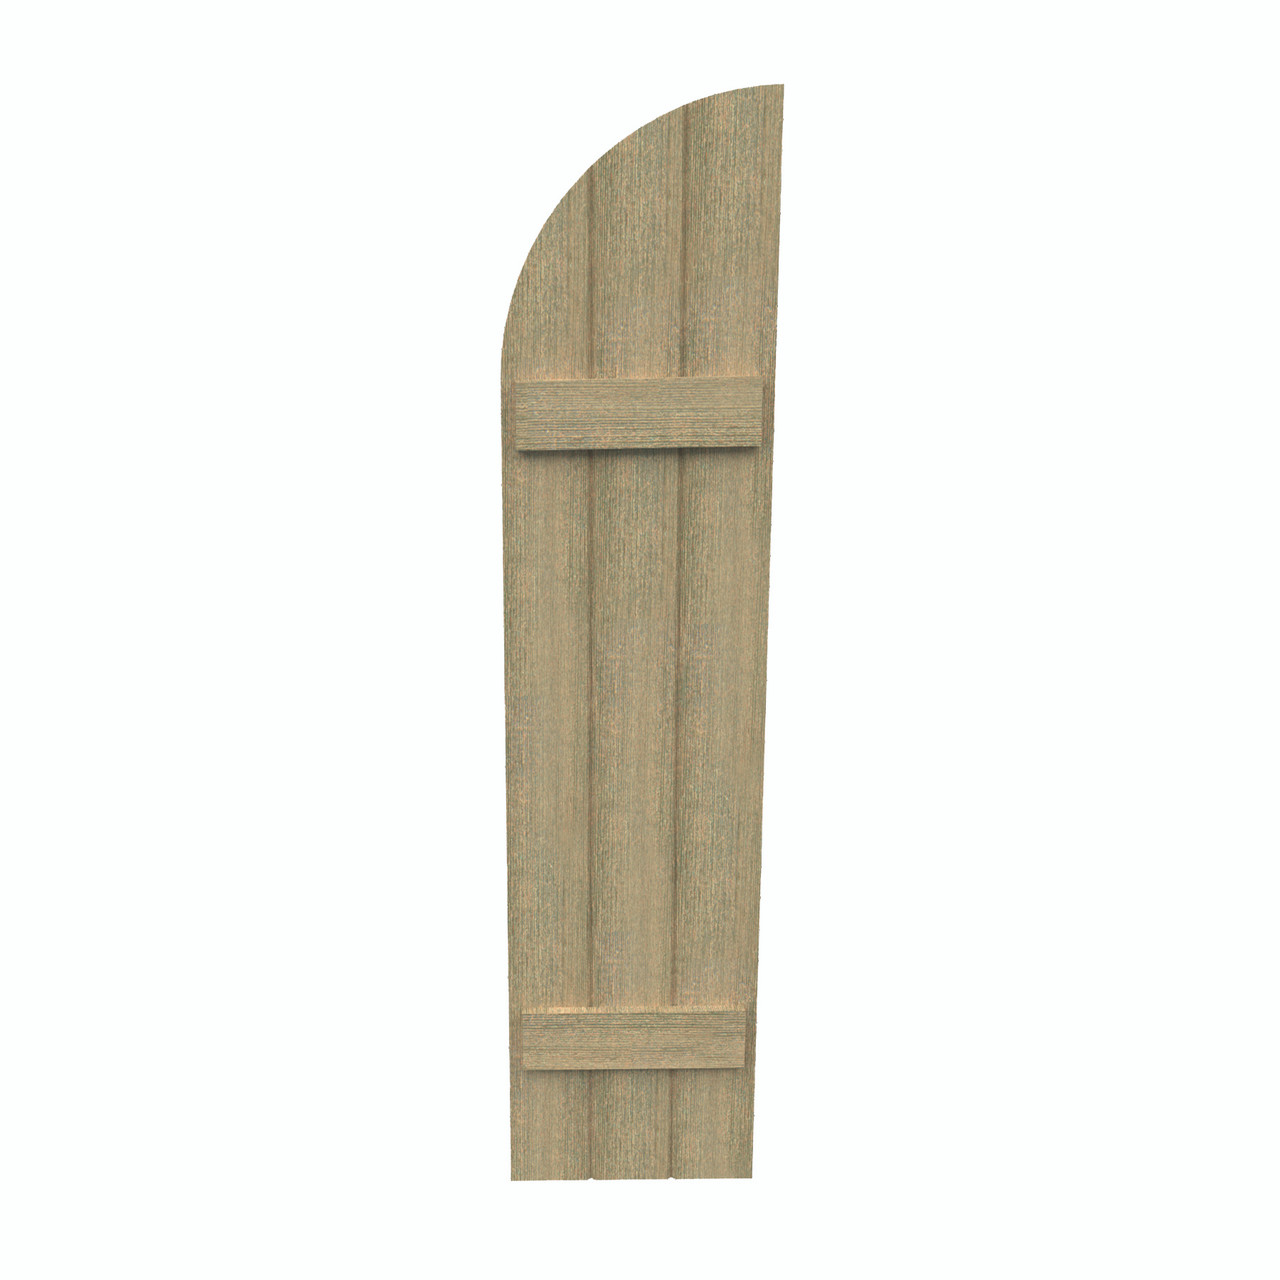 18 inch by 53 inch Quarter Round Shutter with 3-Boards